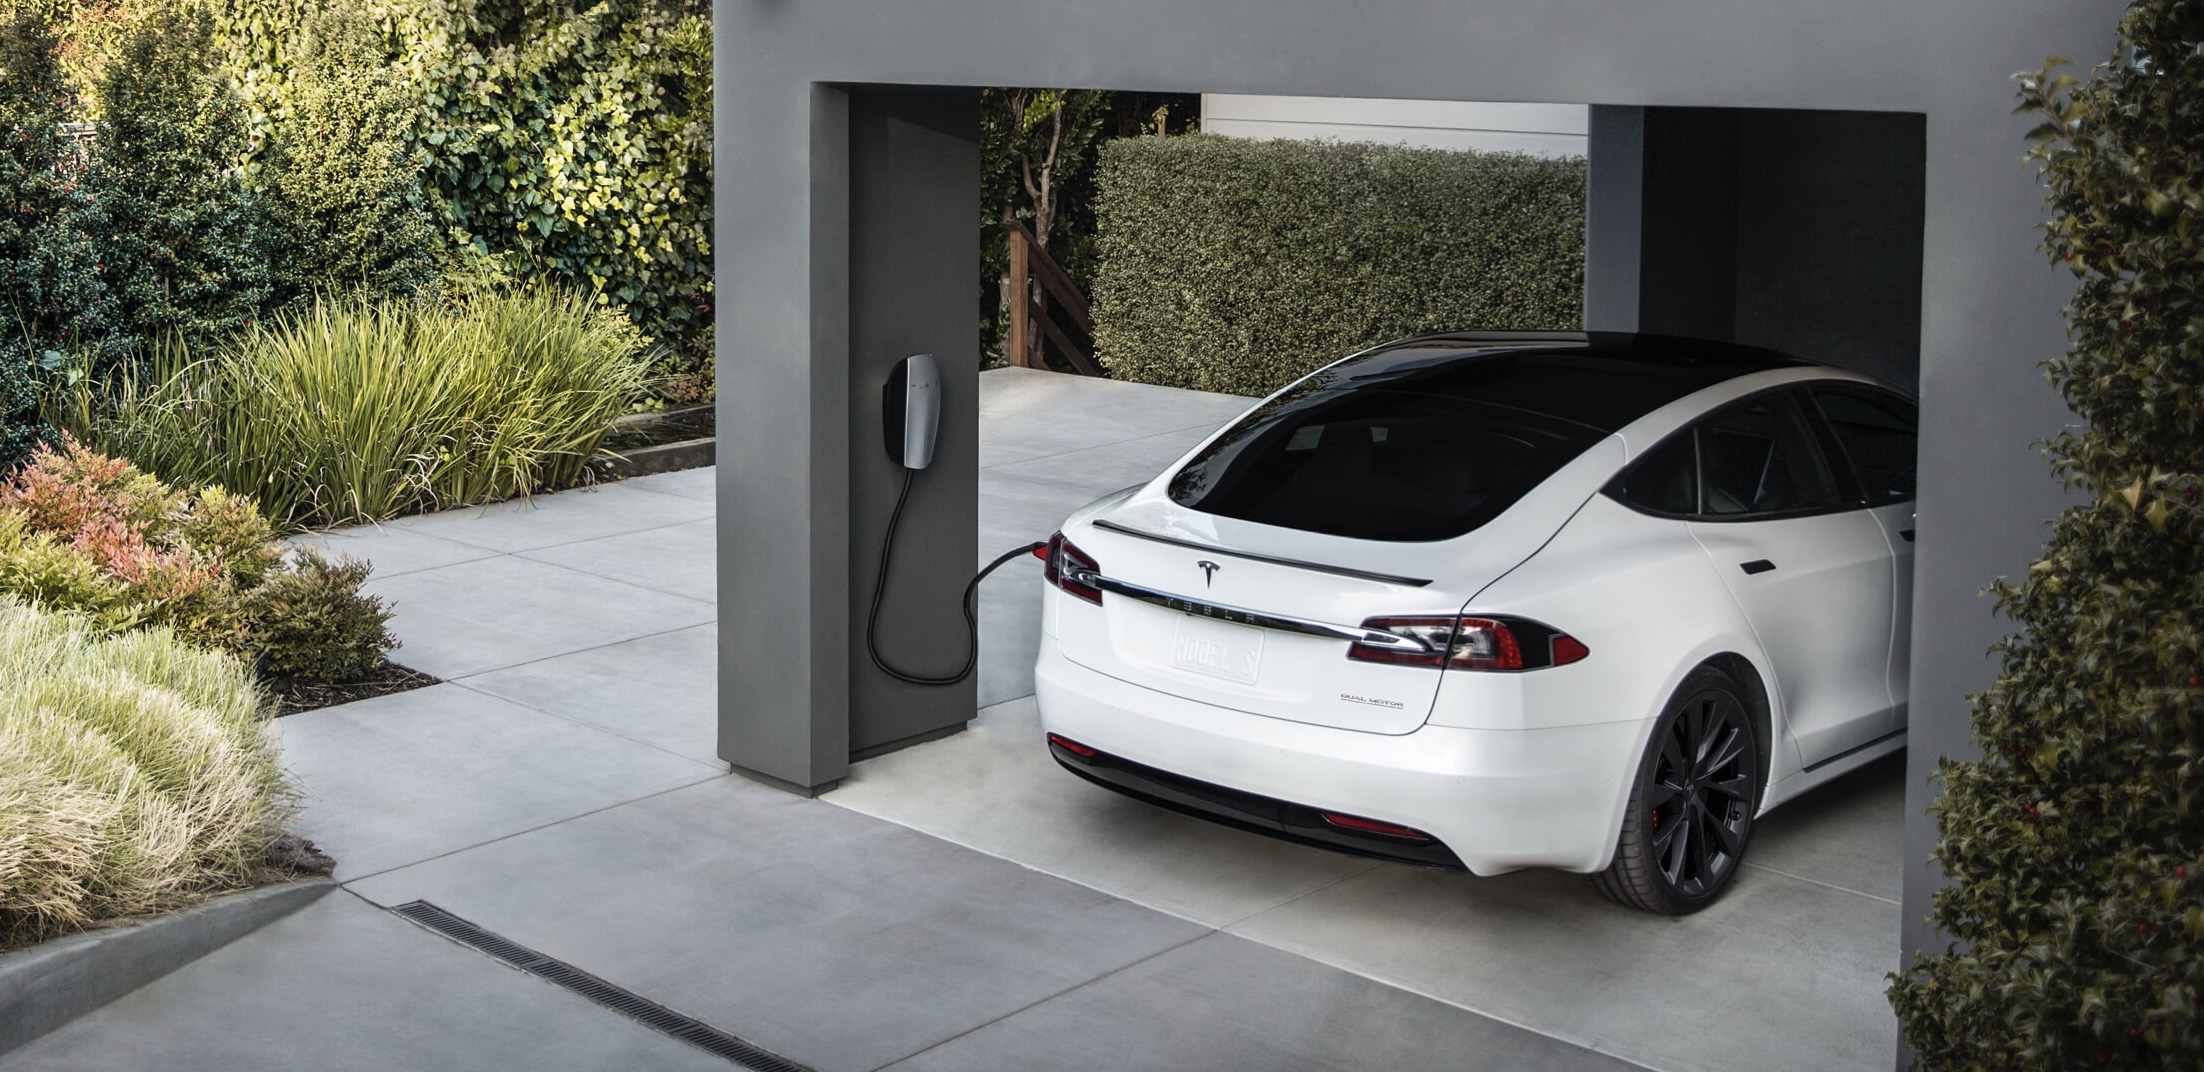 majs Hør efter Bermad Tesla voids your warranty if you try to power your home with your electric  car battery pack | Electrek